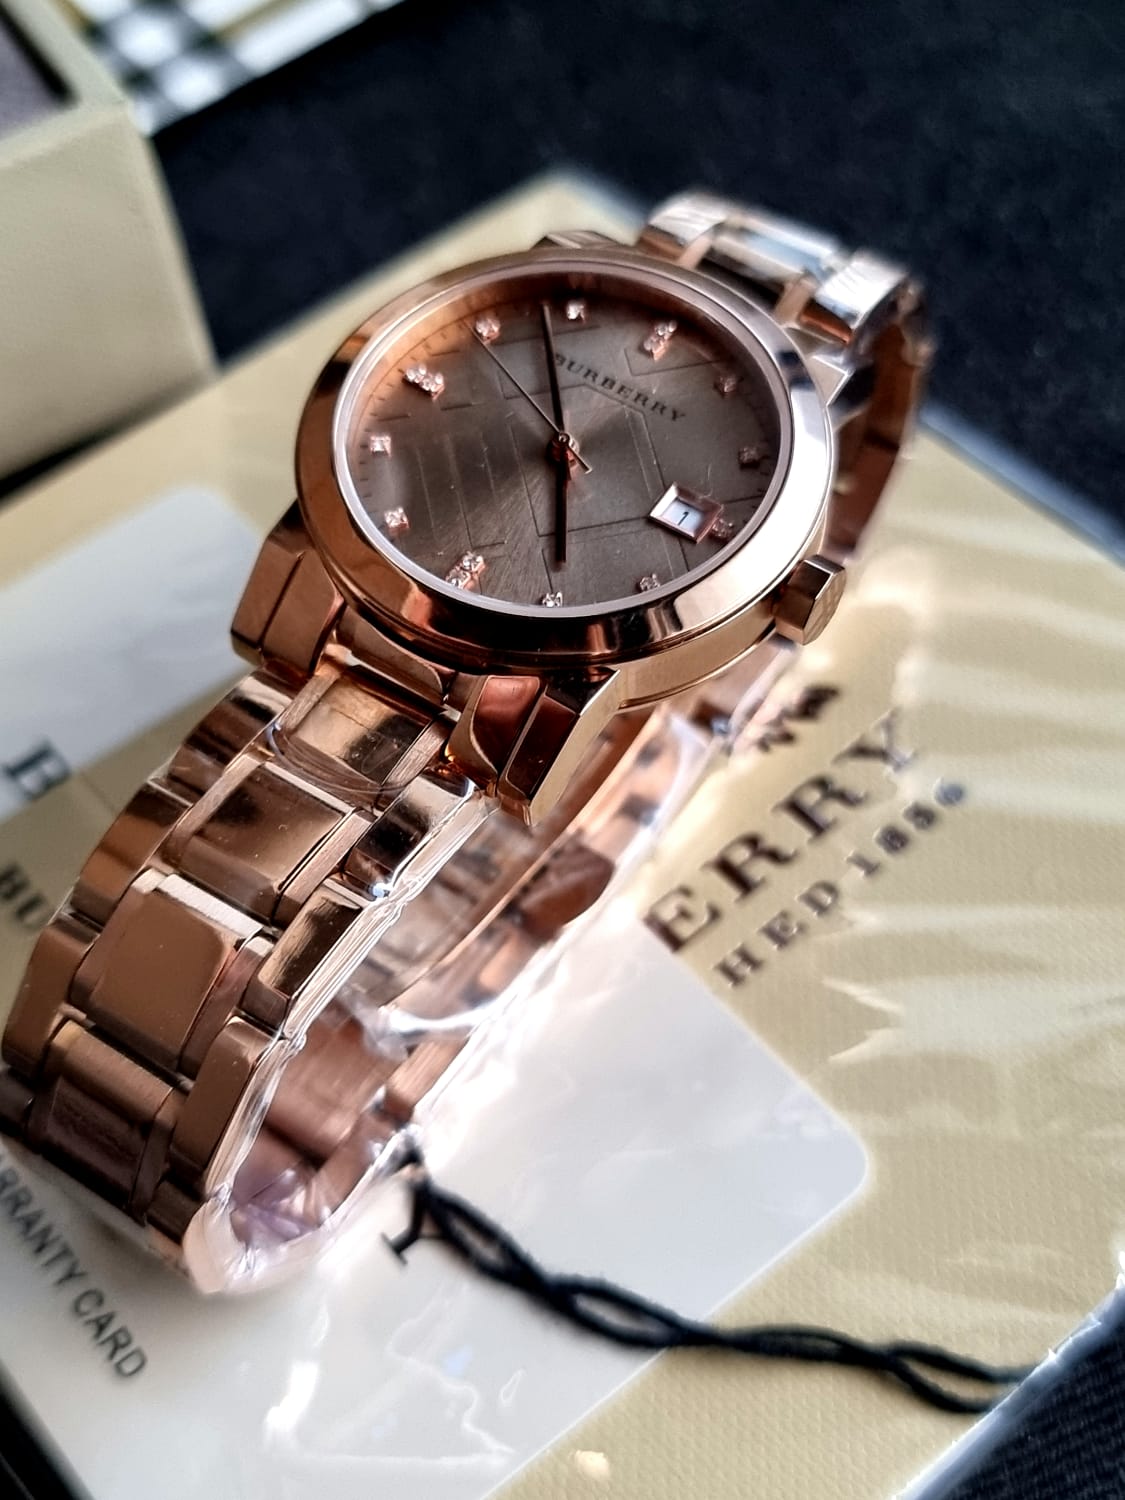 Burberry Women’s Swiss Made Stainless Steel Rose Gold Dial 34mm Watch BU9126